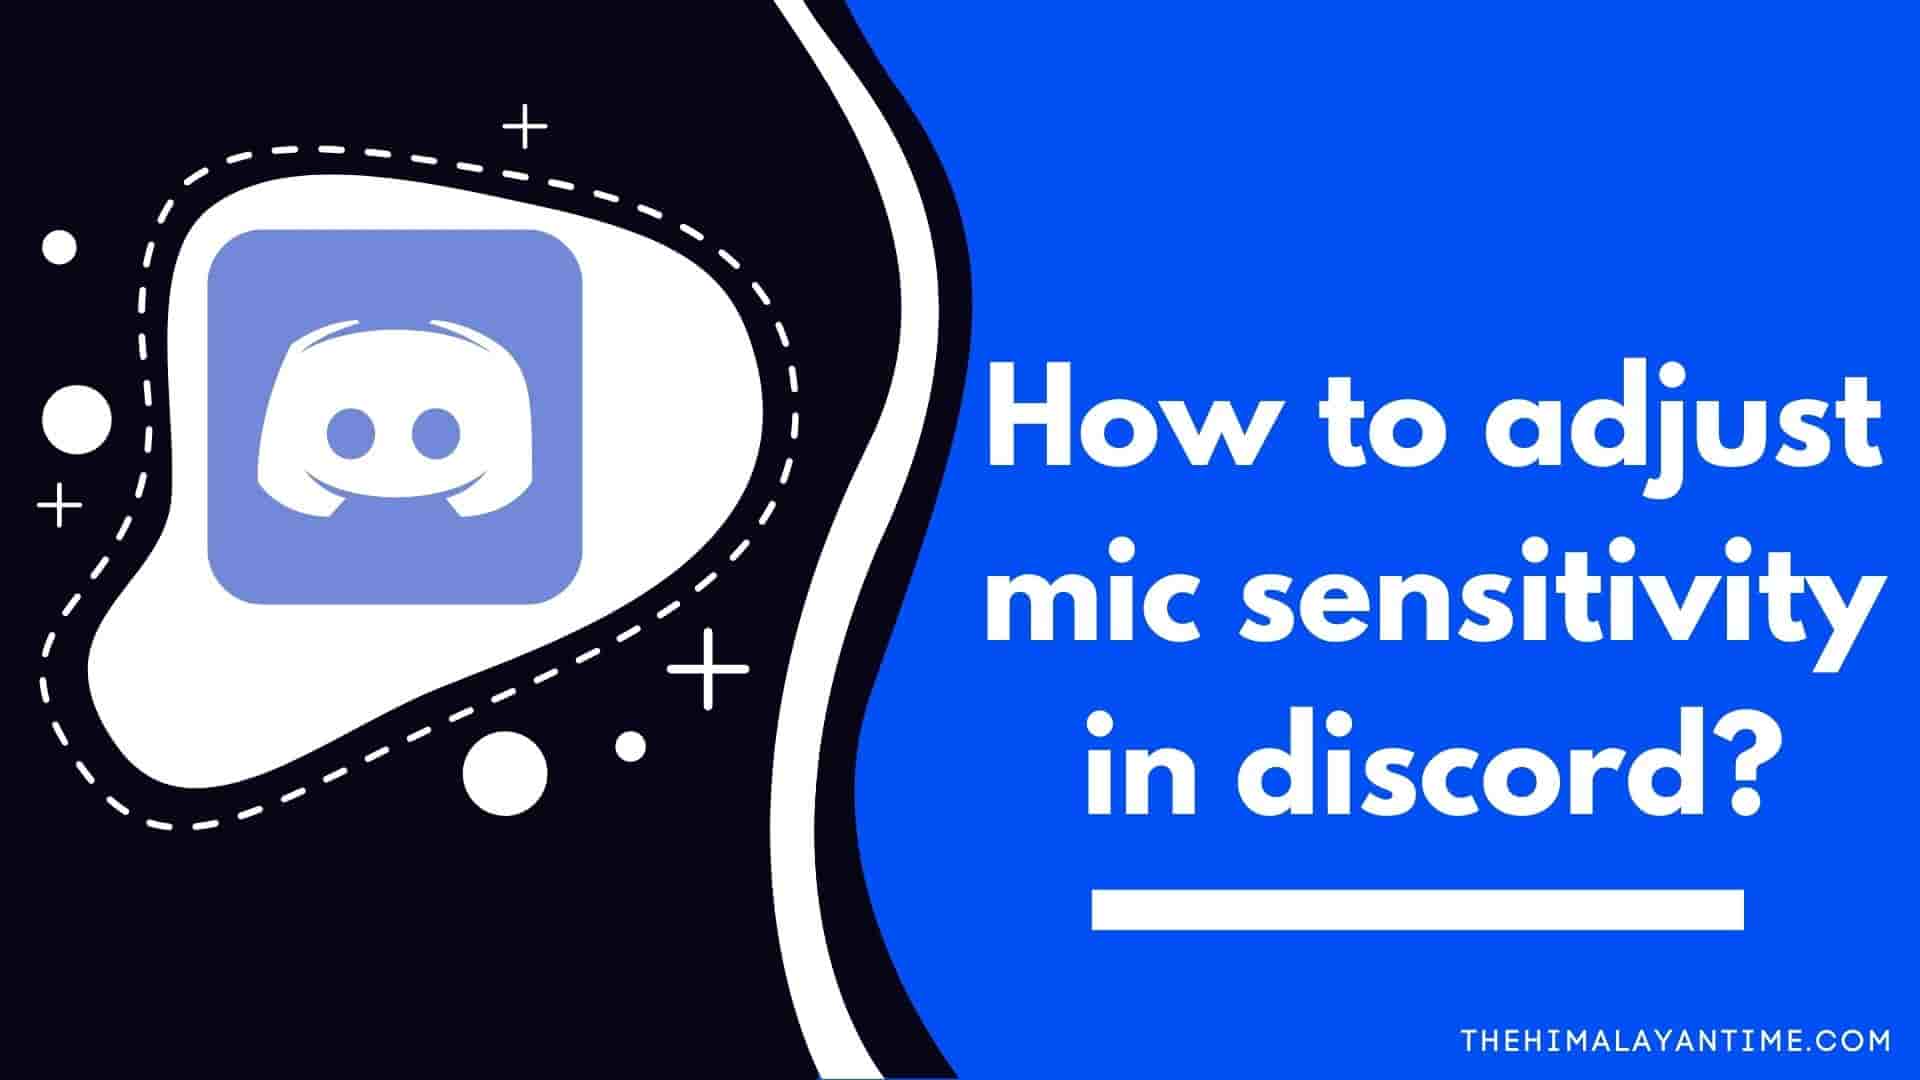 How to adjust mic sensitivity in discord?